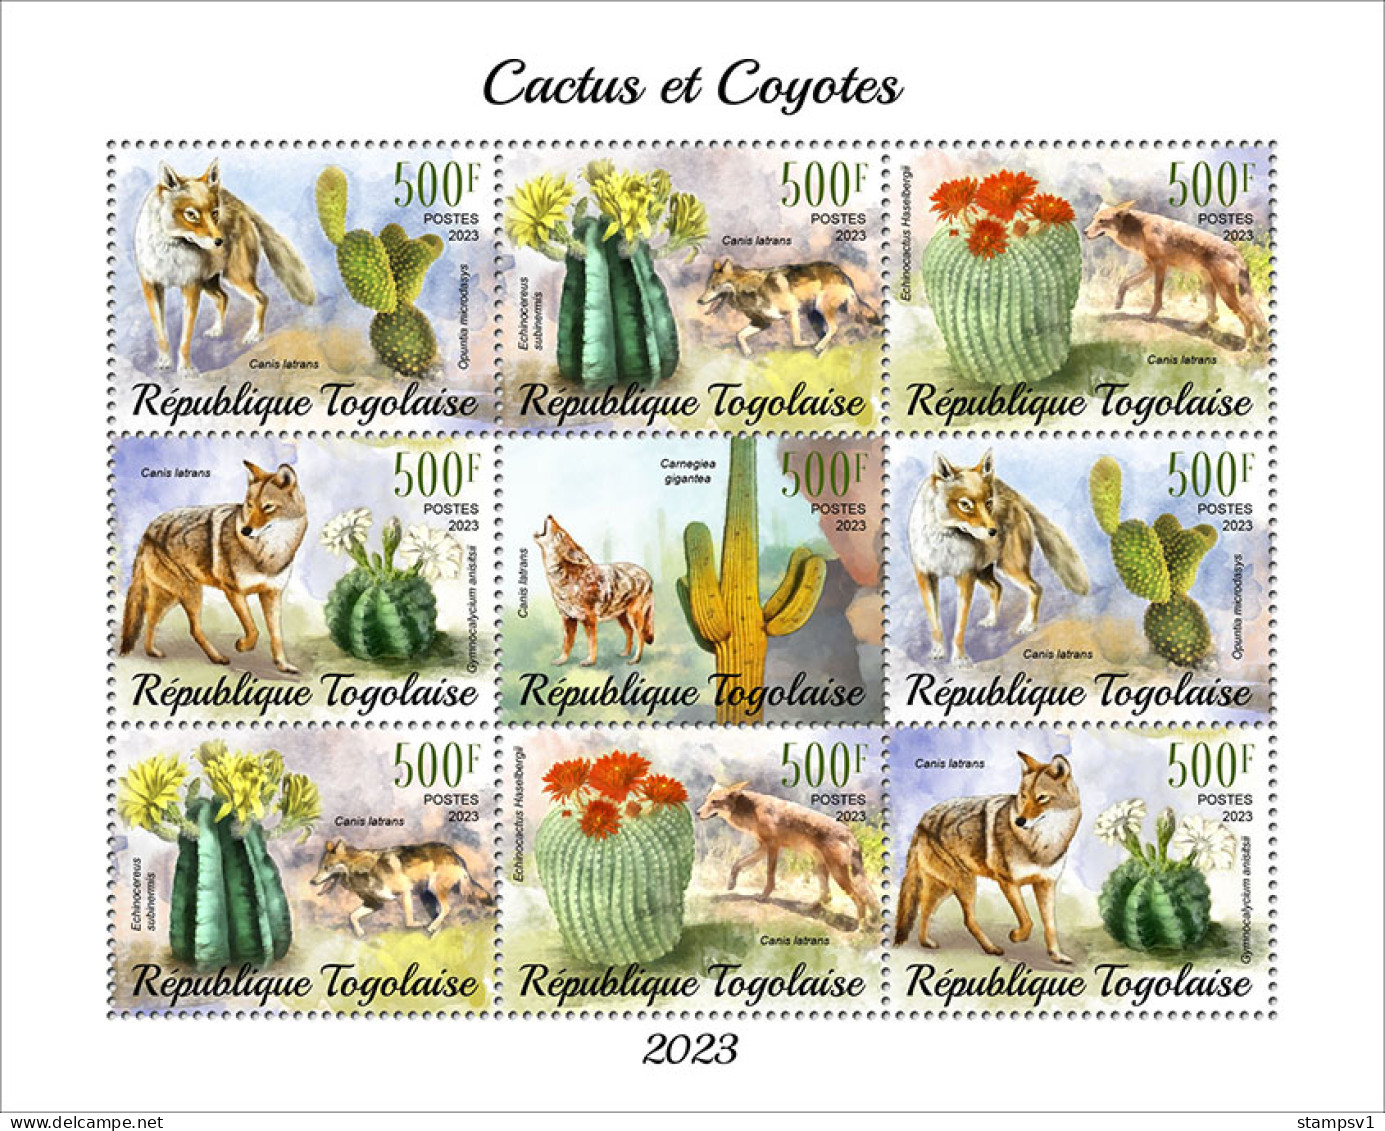 Togo  2023 Cactus And Coyotes. (249f22) OFFICIAL ISSUE - Cactus